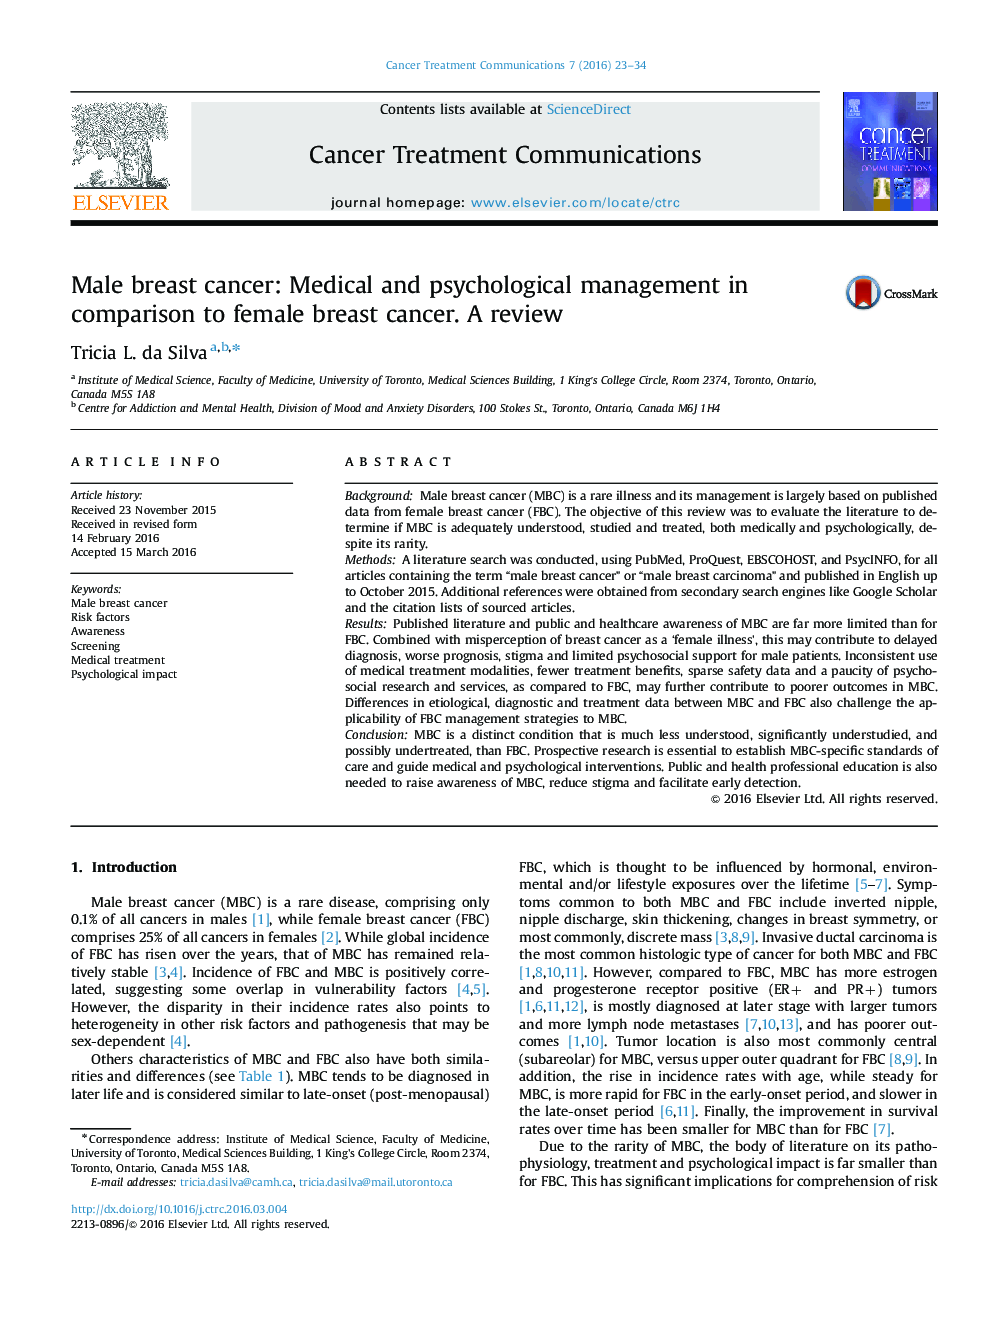 Male breast cancer: Medical and psychological management in comparison to female breast cancer. A review